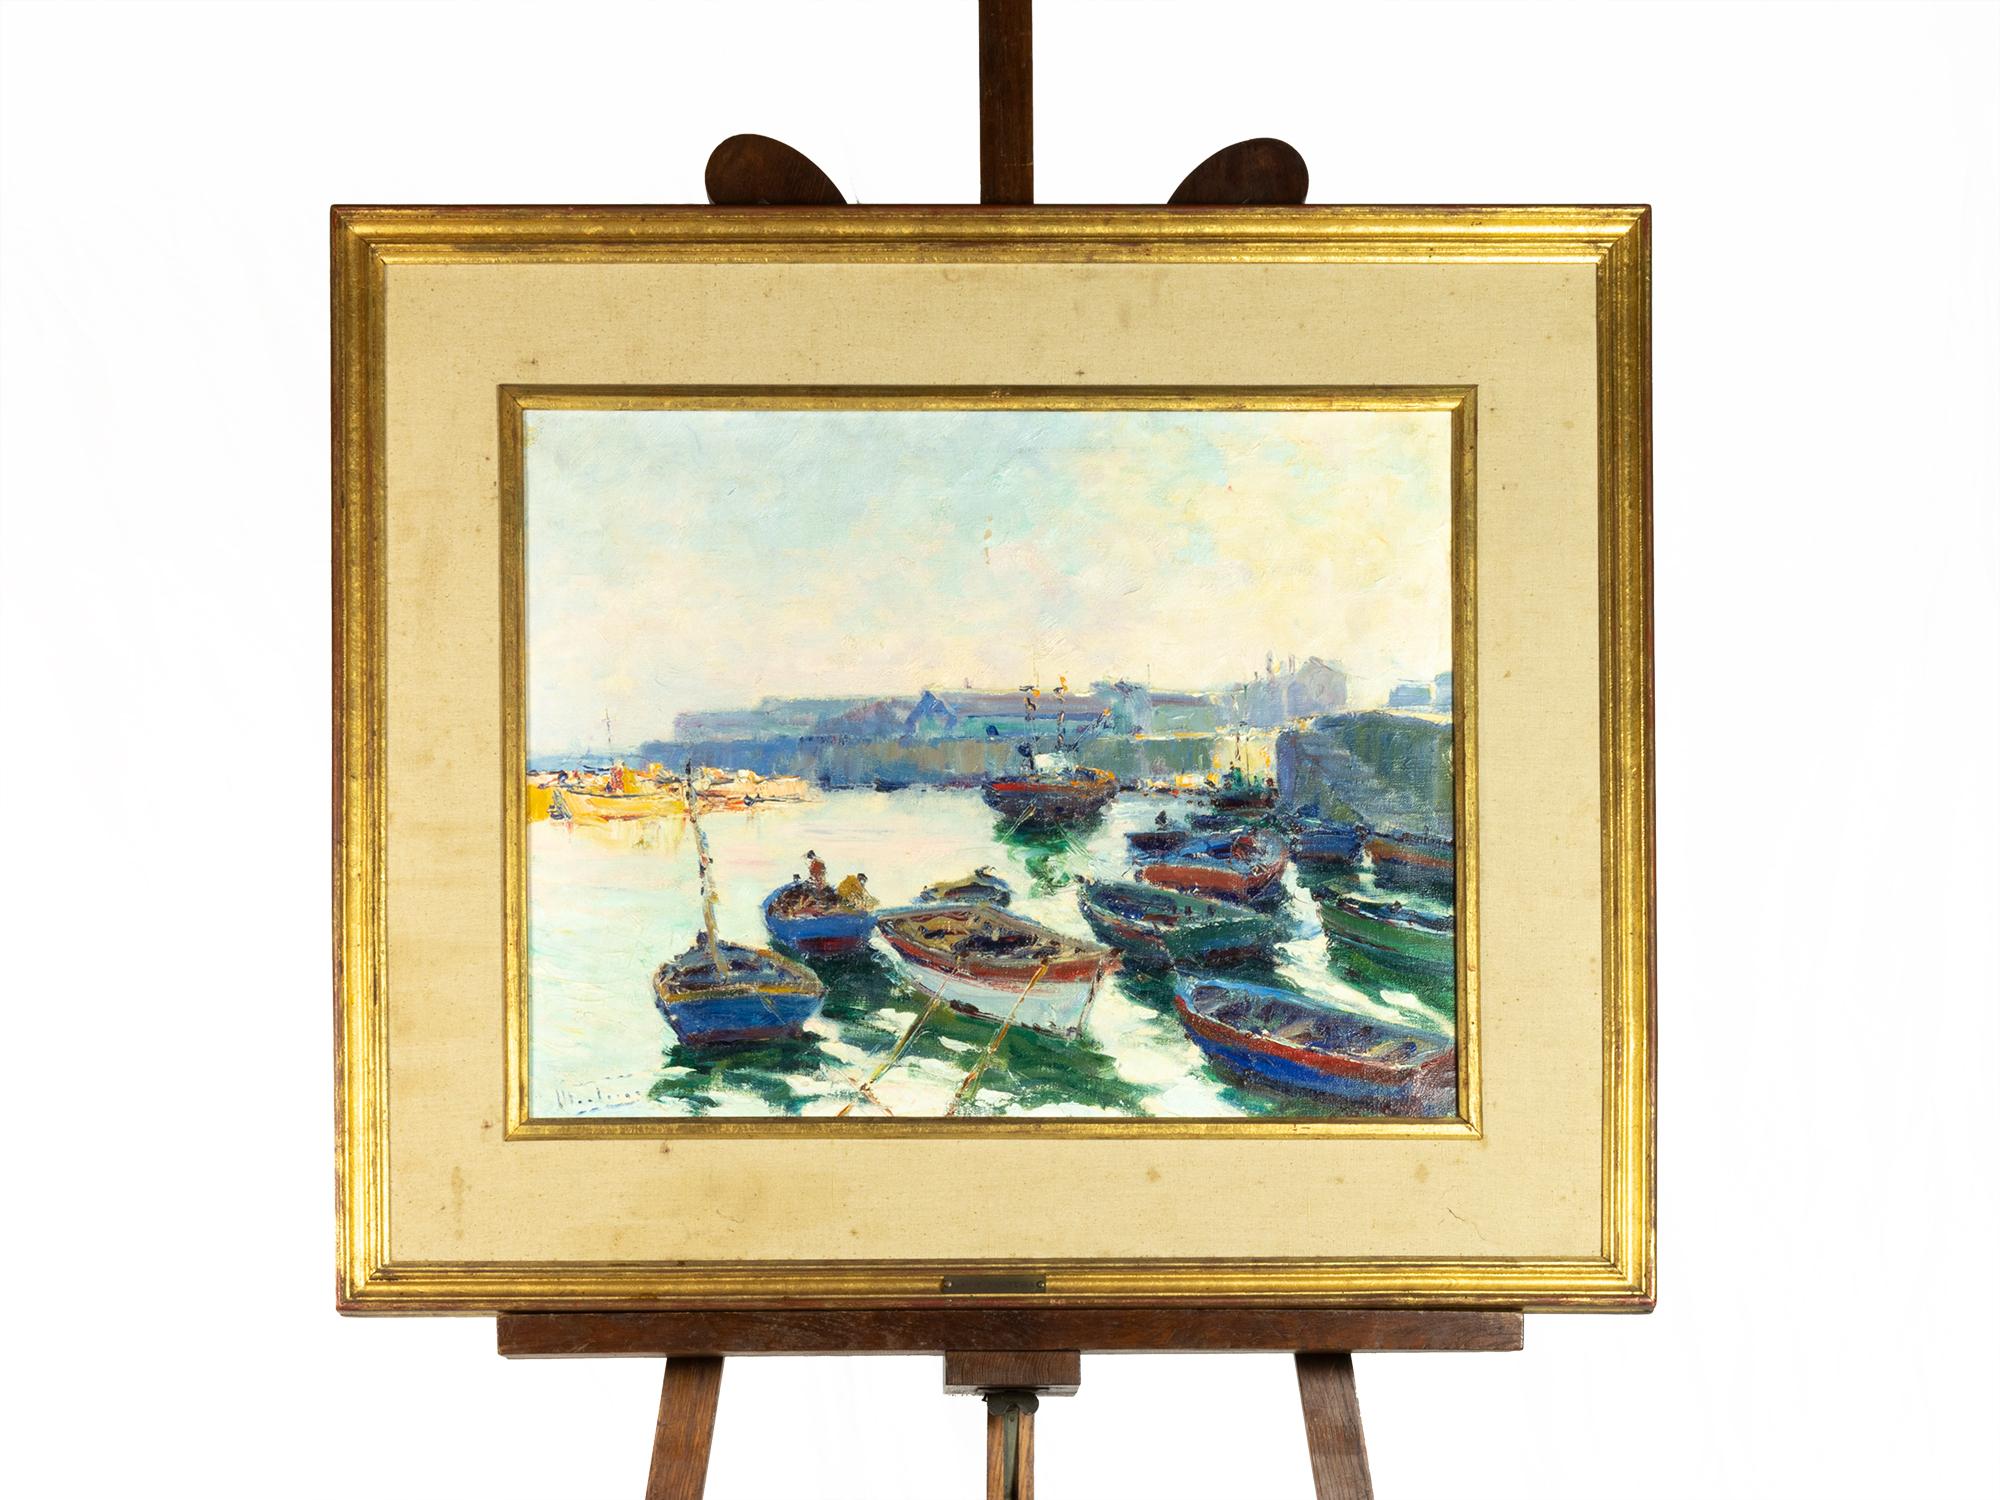 Painting by Jaime Murteira with a maritime motif, boats anchored with a village in the background, signed by the portuguese Jaime Augusto Murteira.

Oil on canvas

Jaime Murteira was a disciple of Frederico Aires and António Saúde. He was regarded